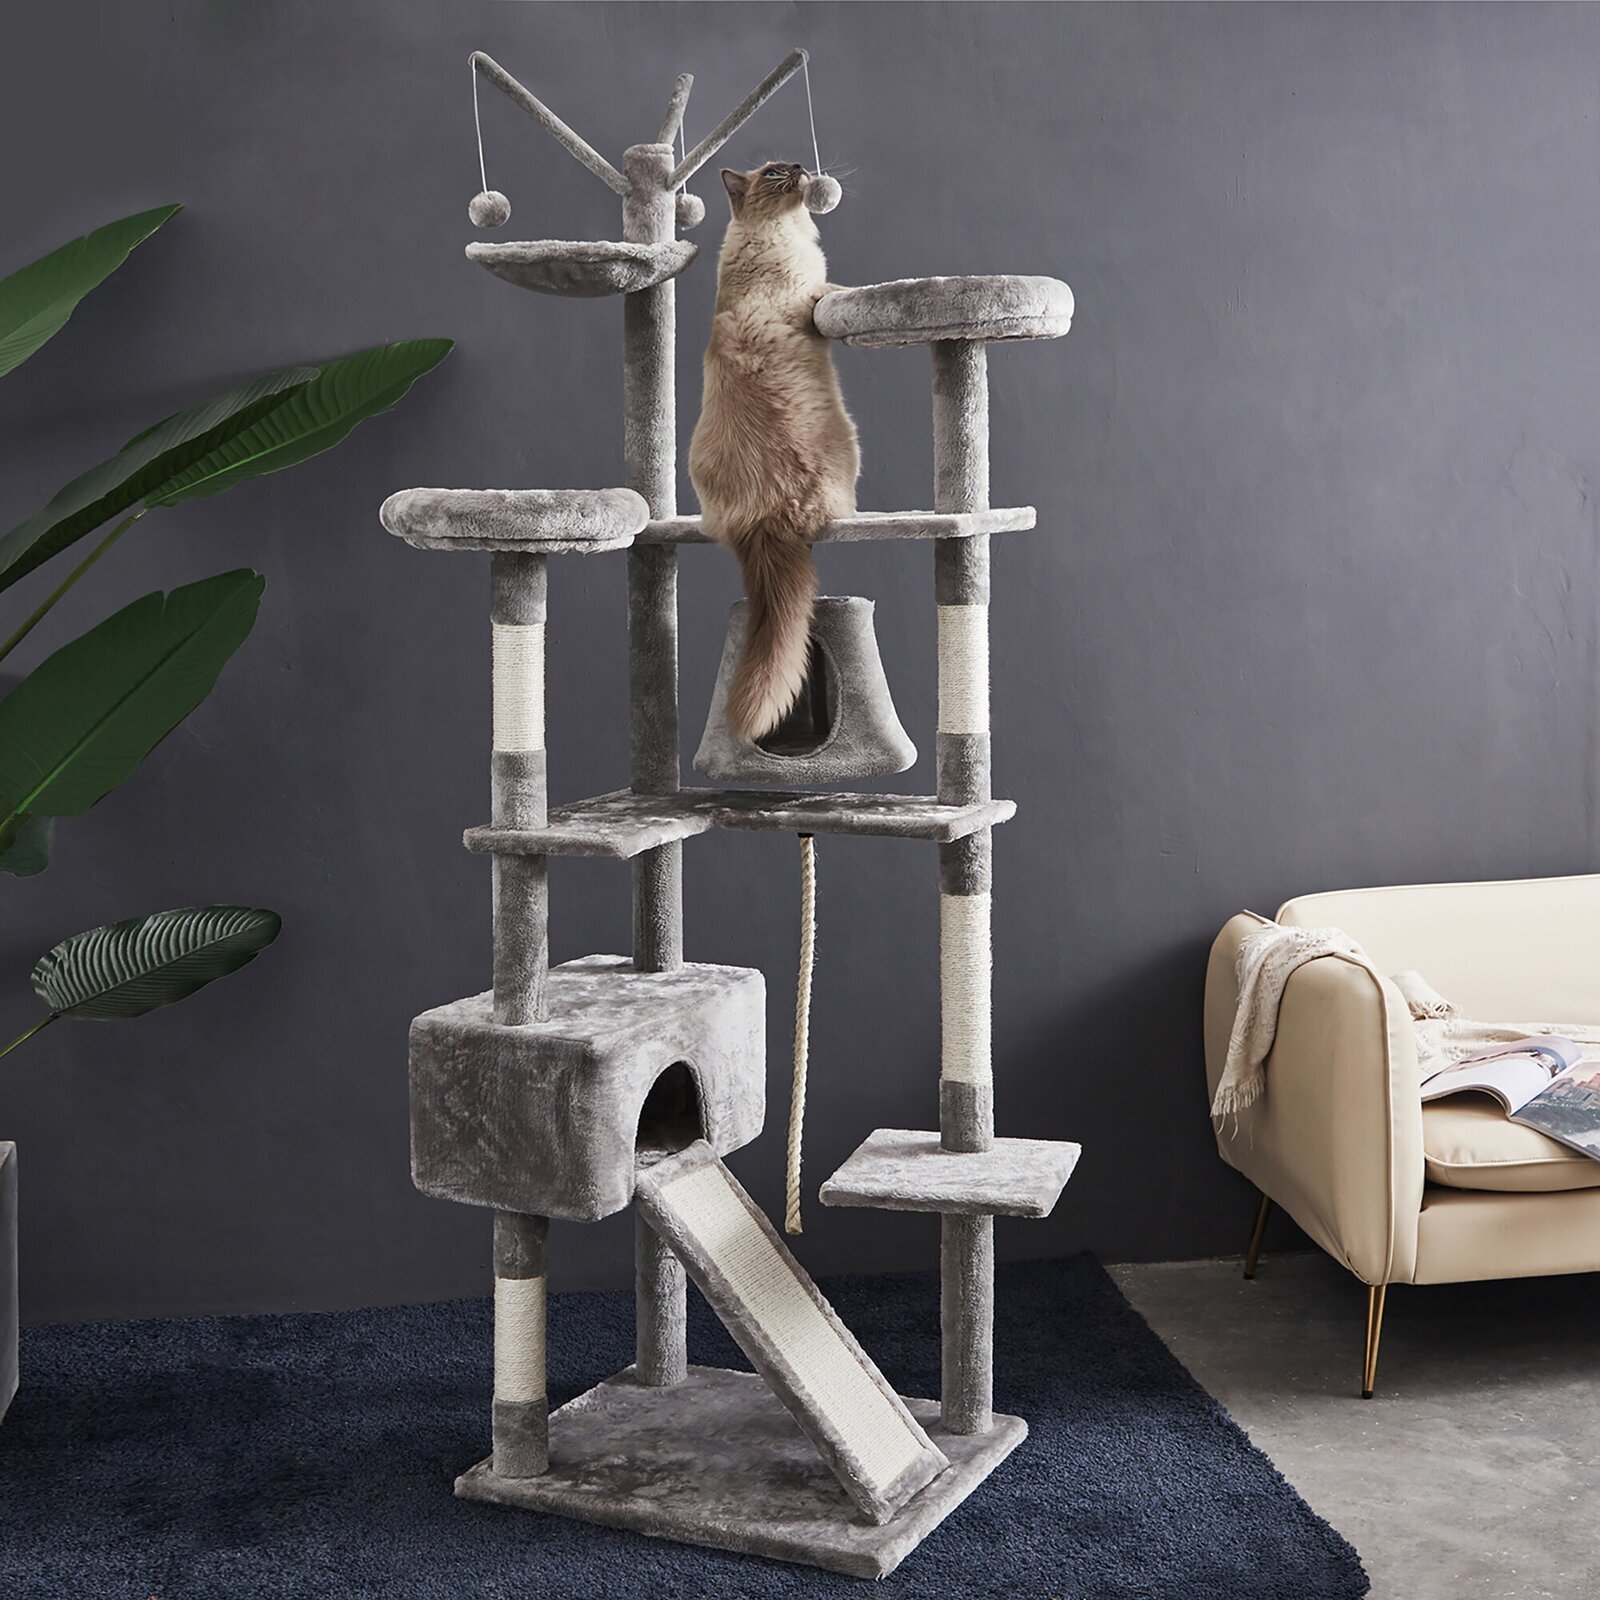 Massive cat tree with toys